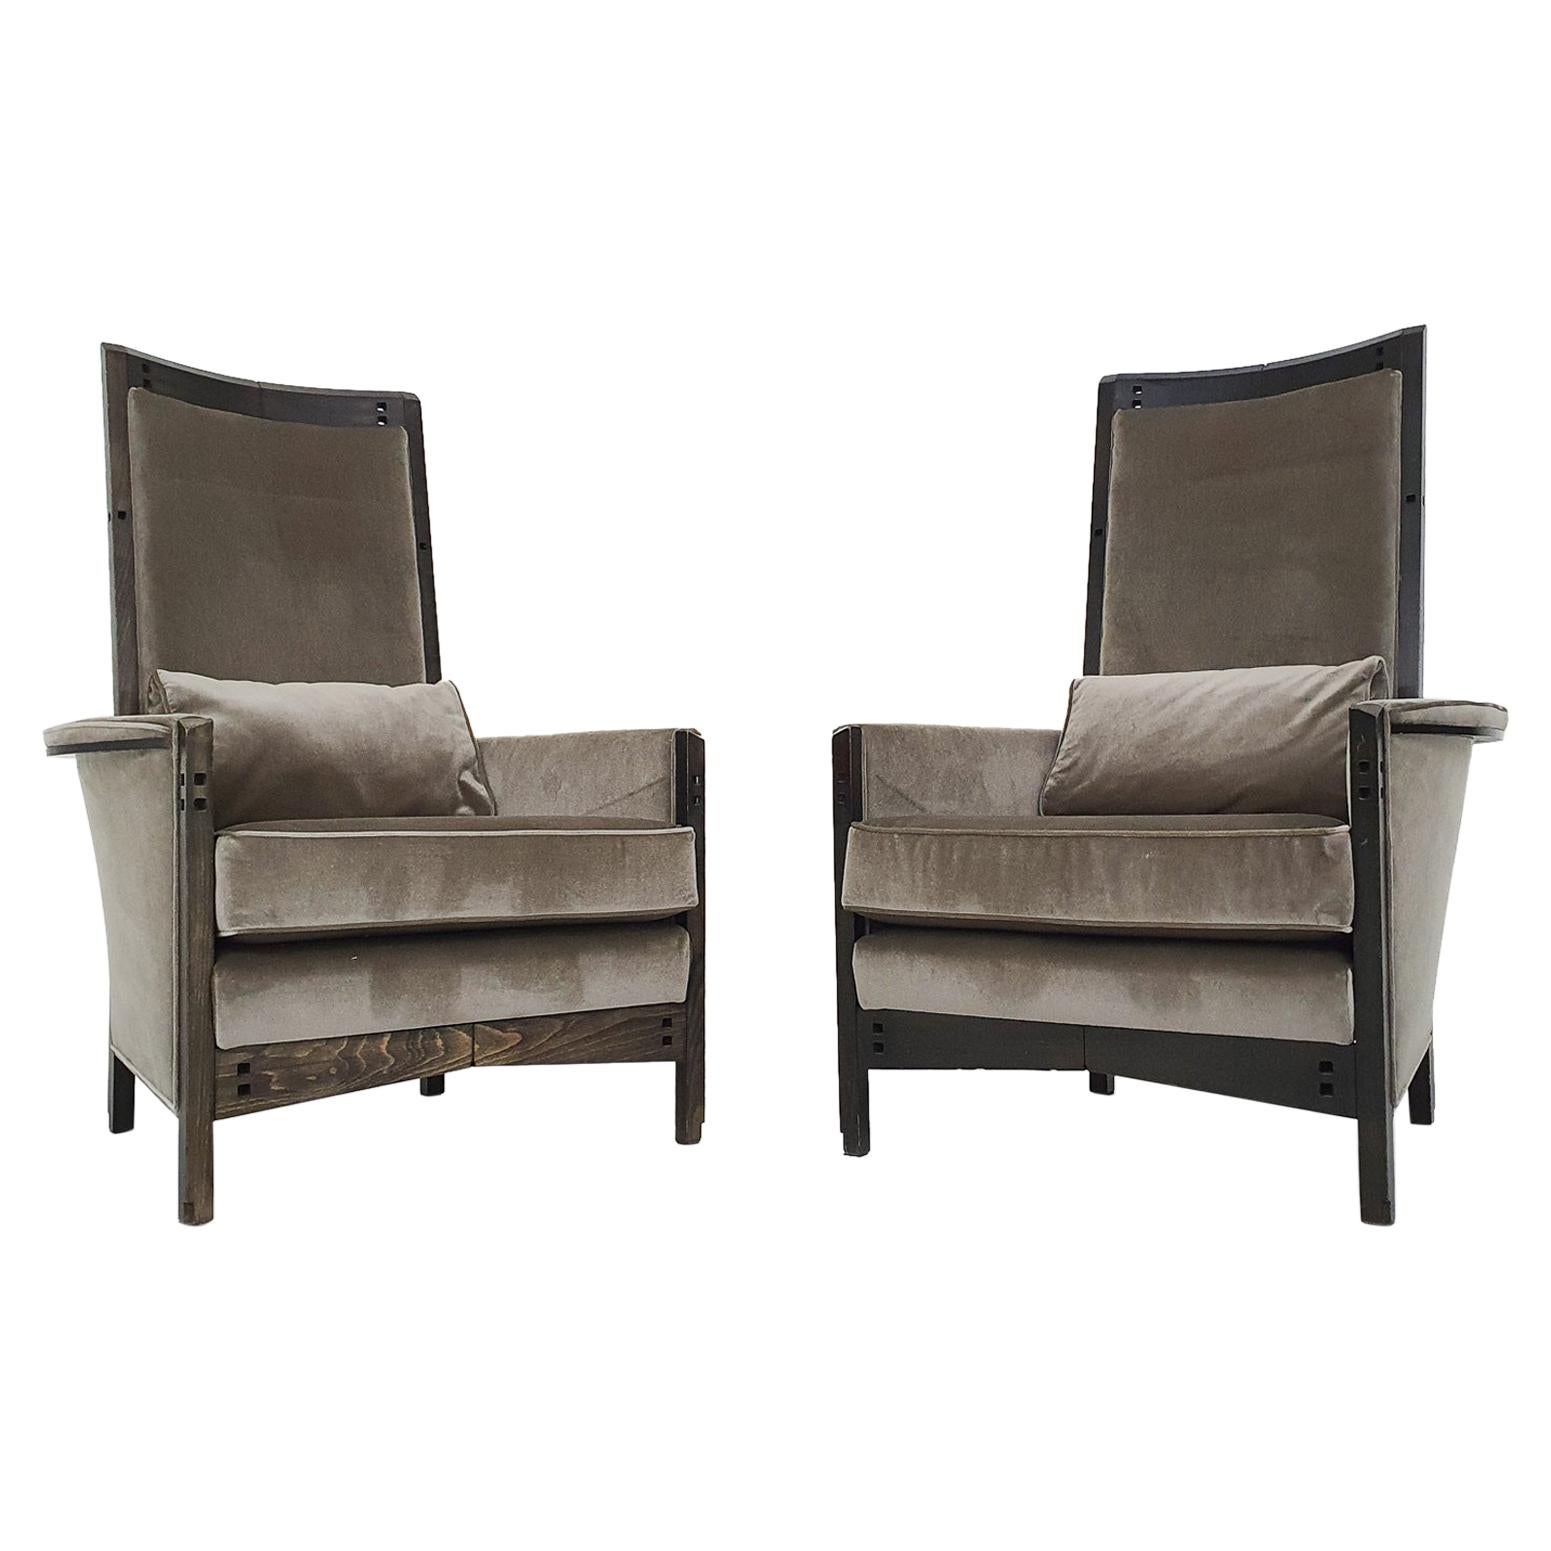 Umberto Asnago for Giorgetti "Peggy 63970" Lounge Chairs, Set of 2, Italy 1990 For Sale